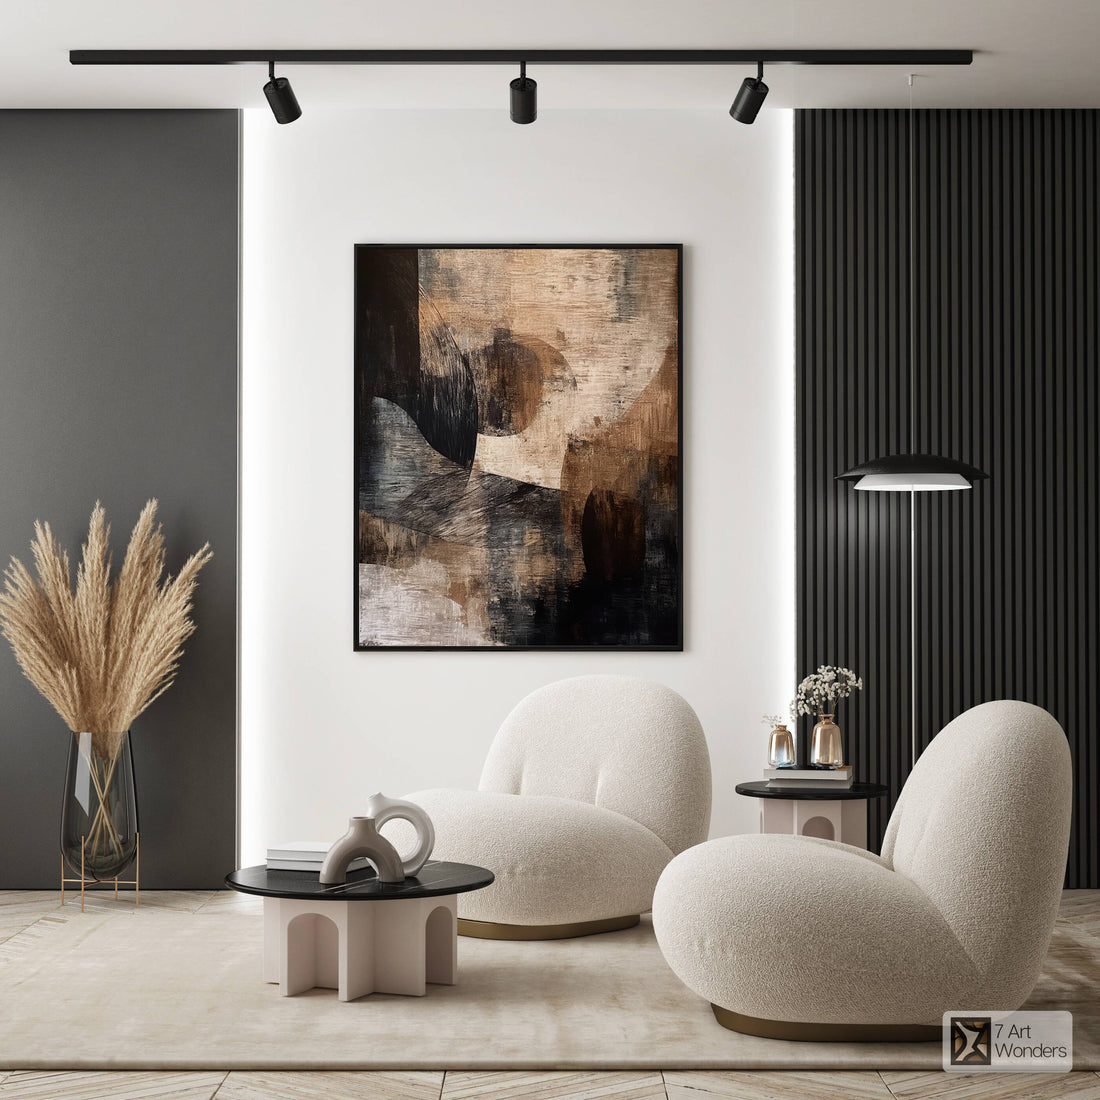 Wall Decor Trends: What to Look for in 2023